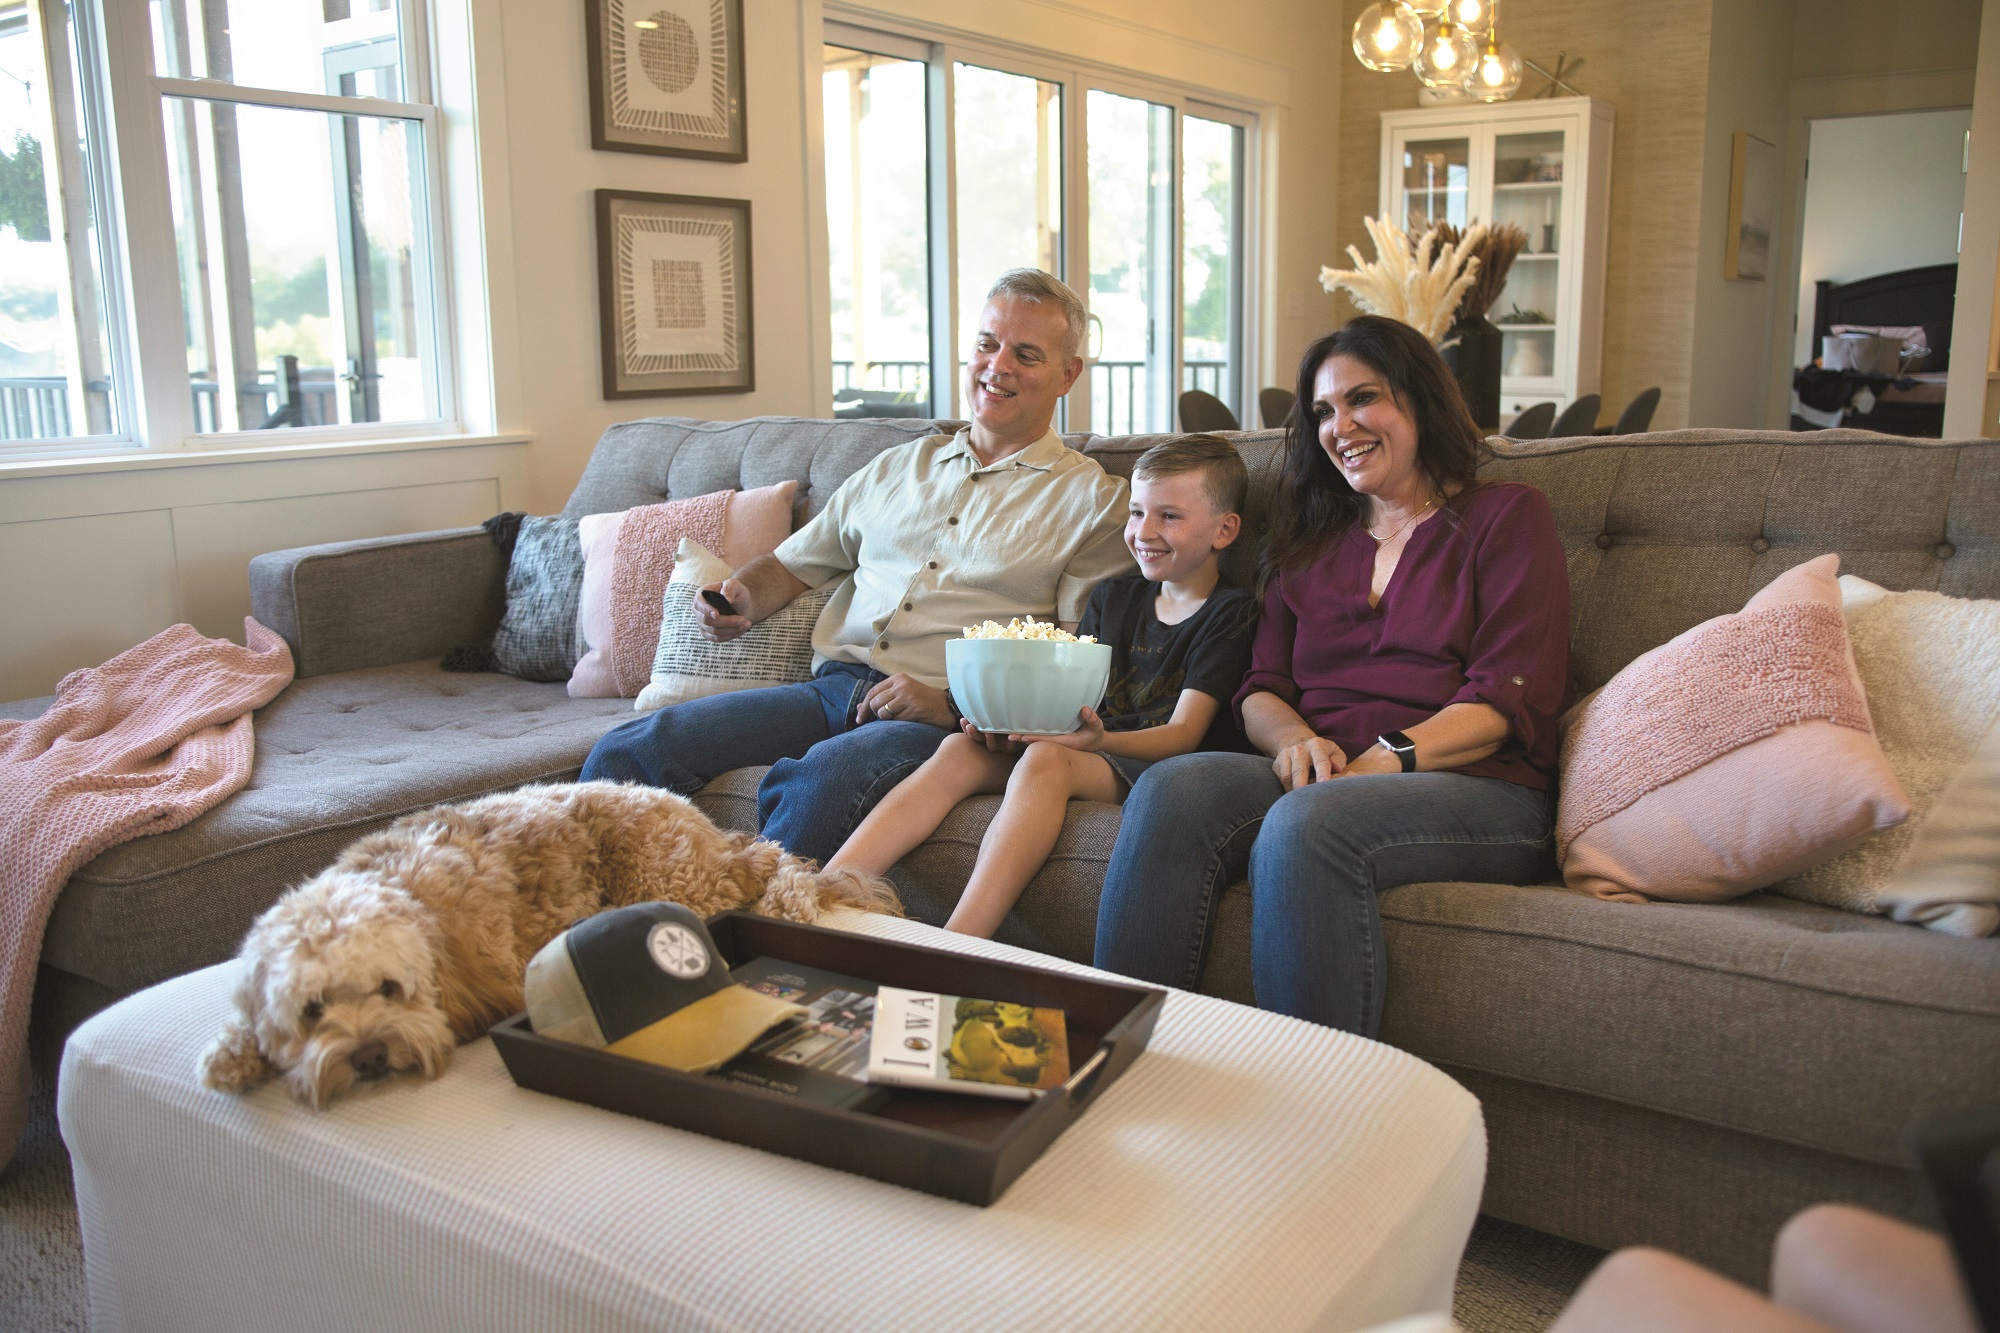 family on couch with popcorn and dog